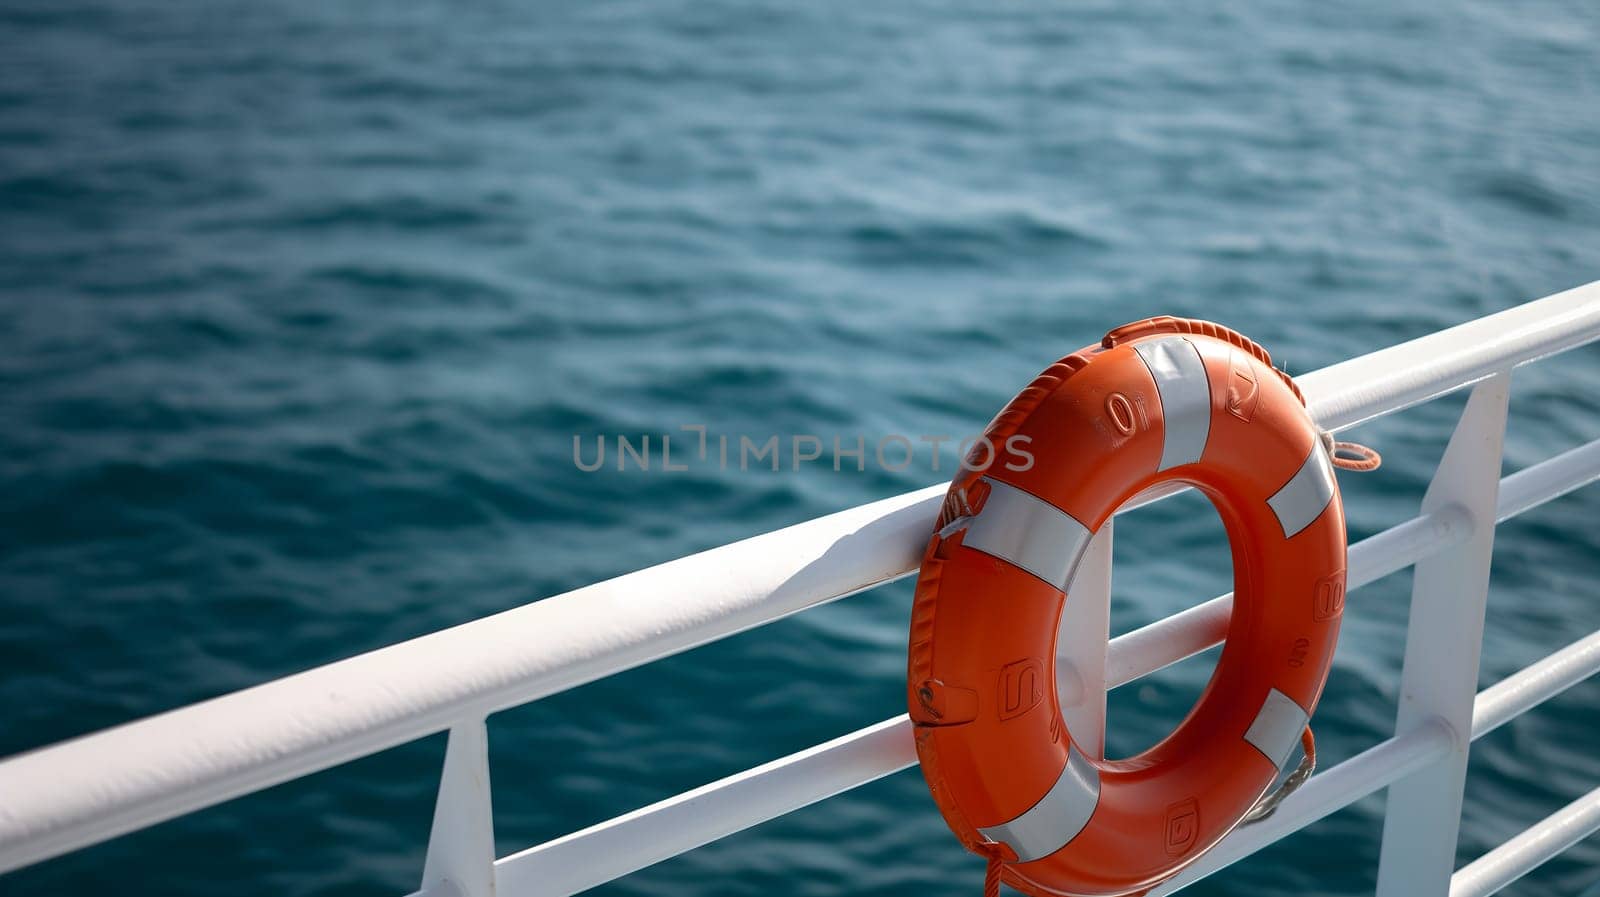 Lifebuoy attached to a ship's white railing, with the clear blue sea in the background. Neural network generated image. Not based on any actual scene or pattern.